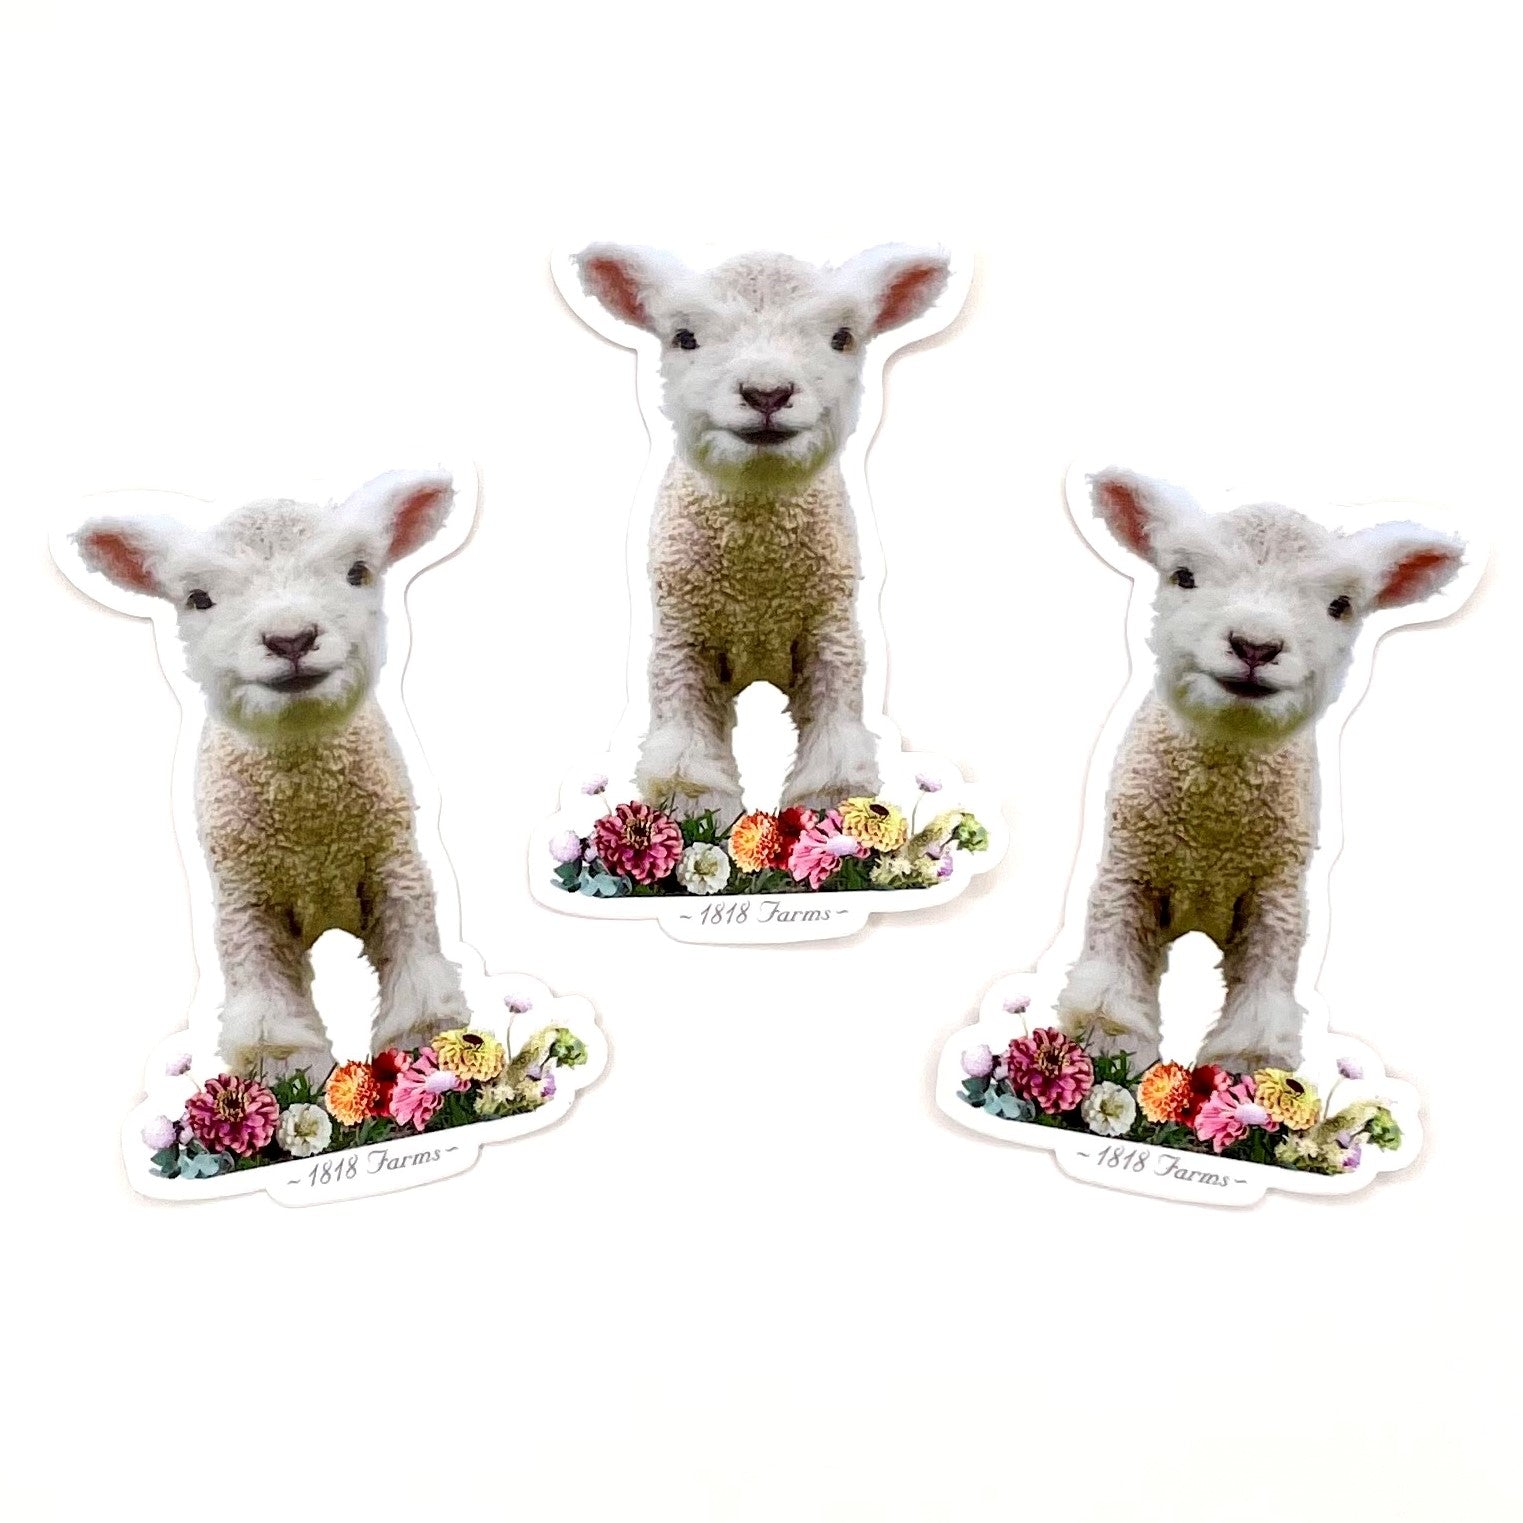 Sticker - Lamb with Flowers  1818 Farms   